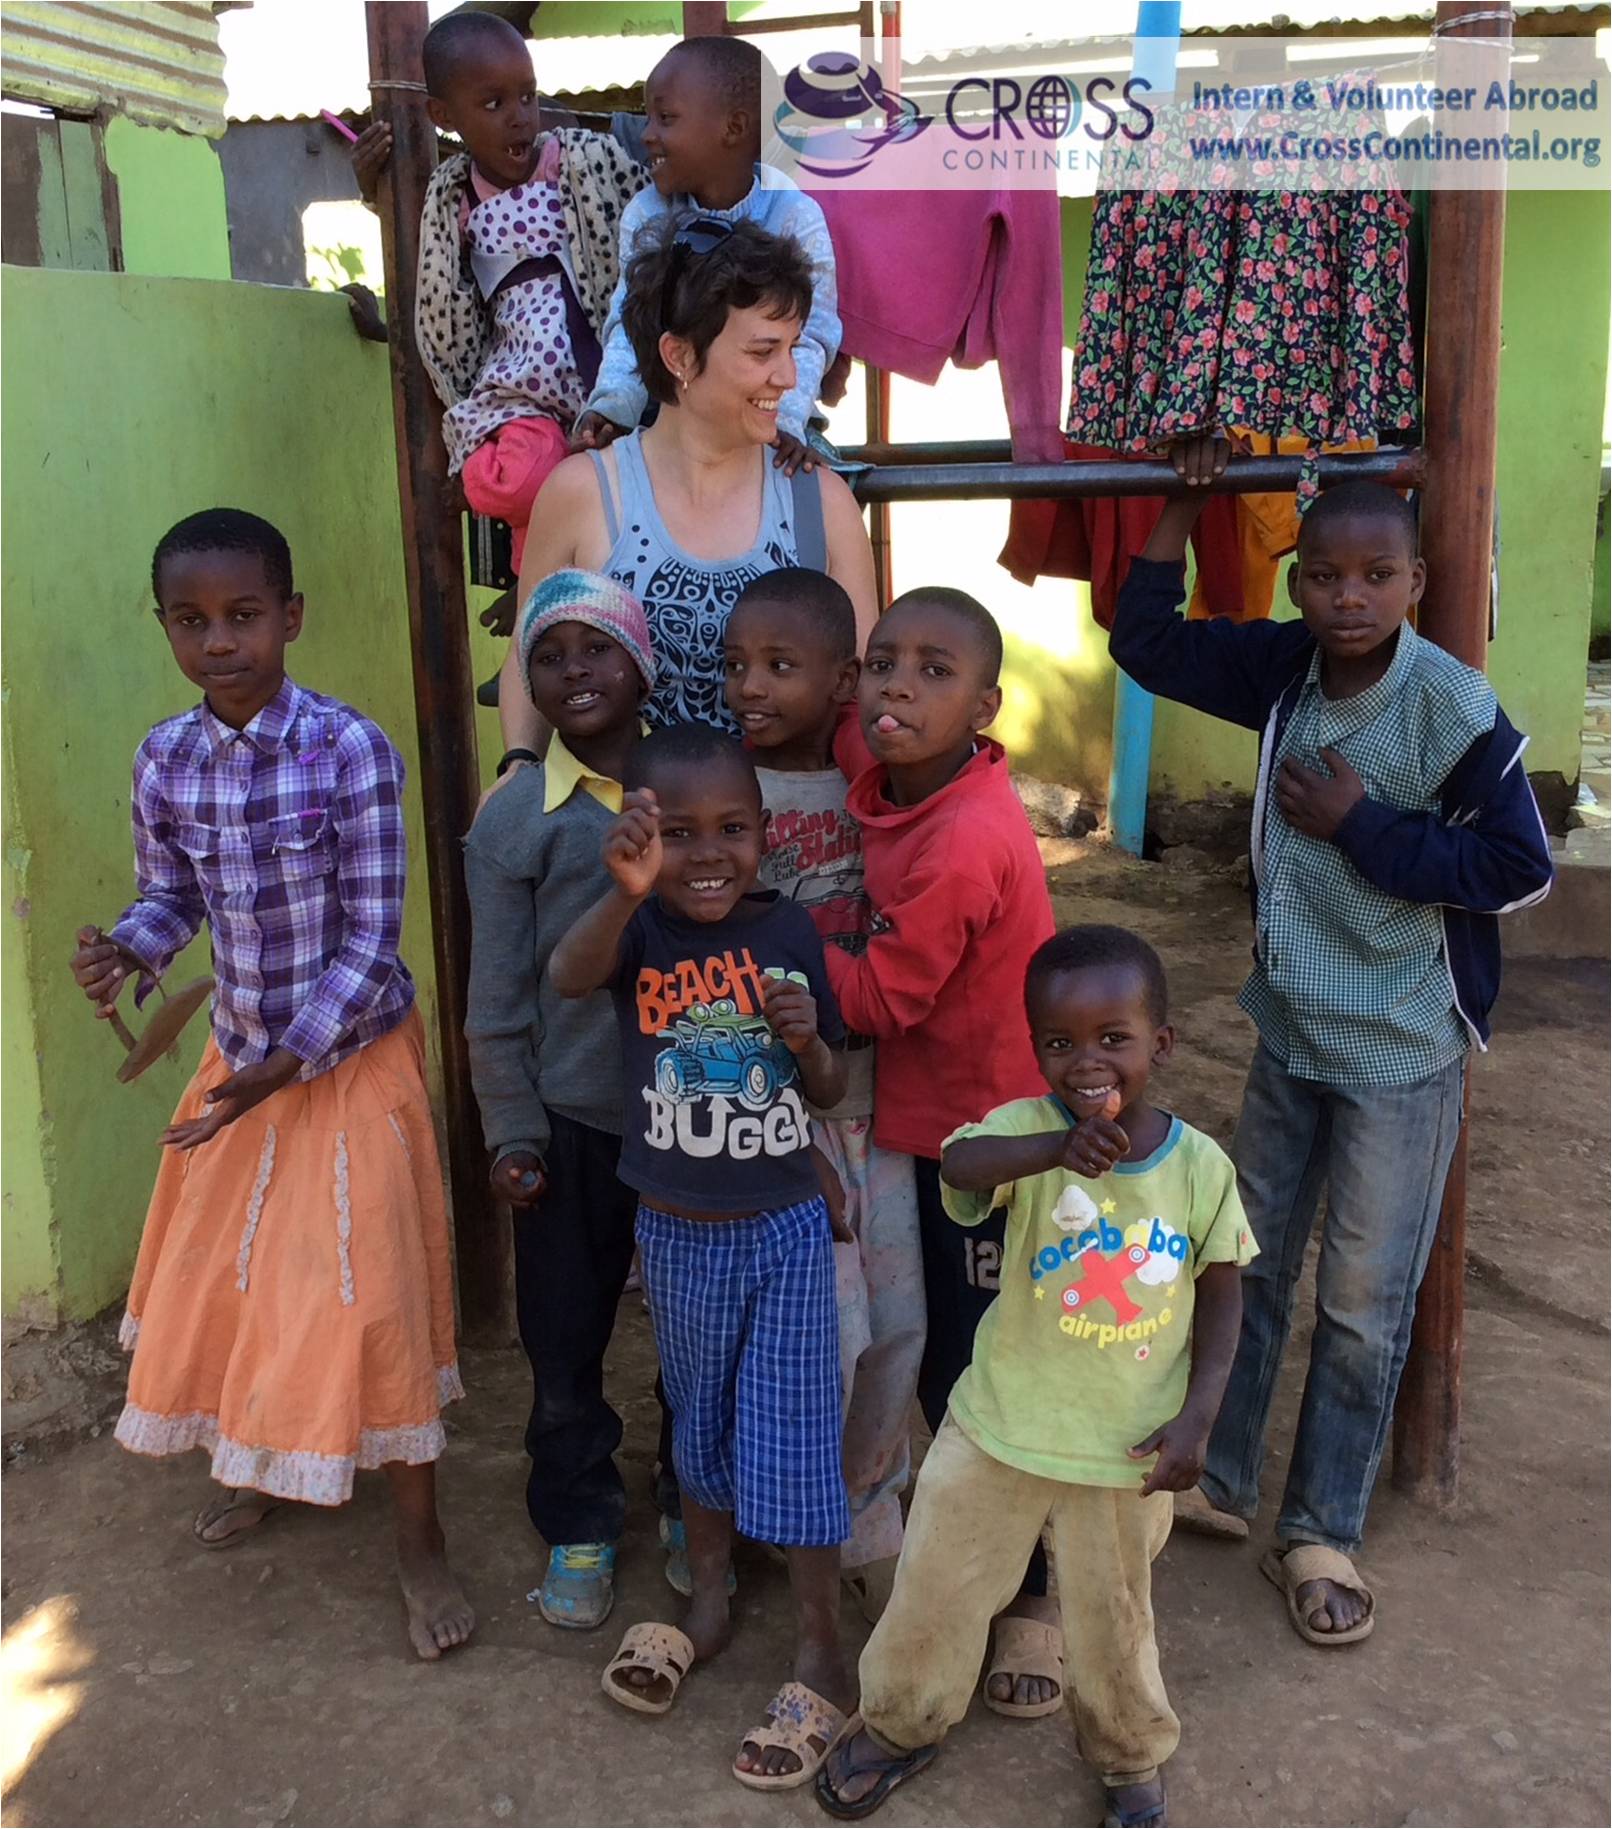 Experienced Teacher Shares Her Volunteer Abroad Experience at Orphanage